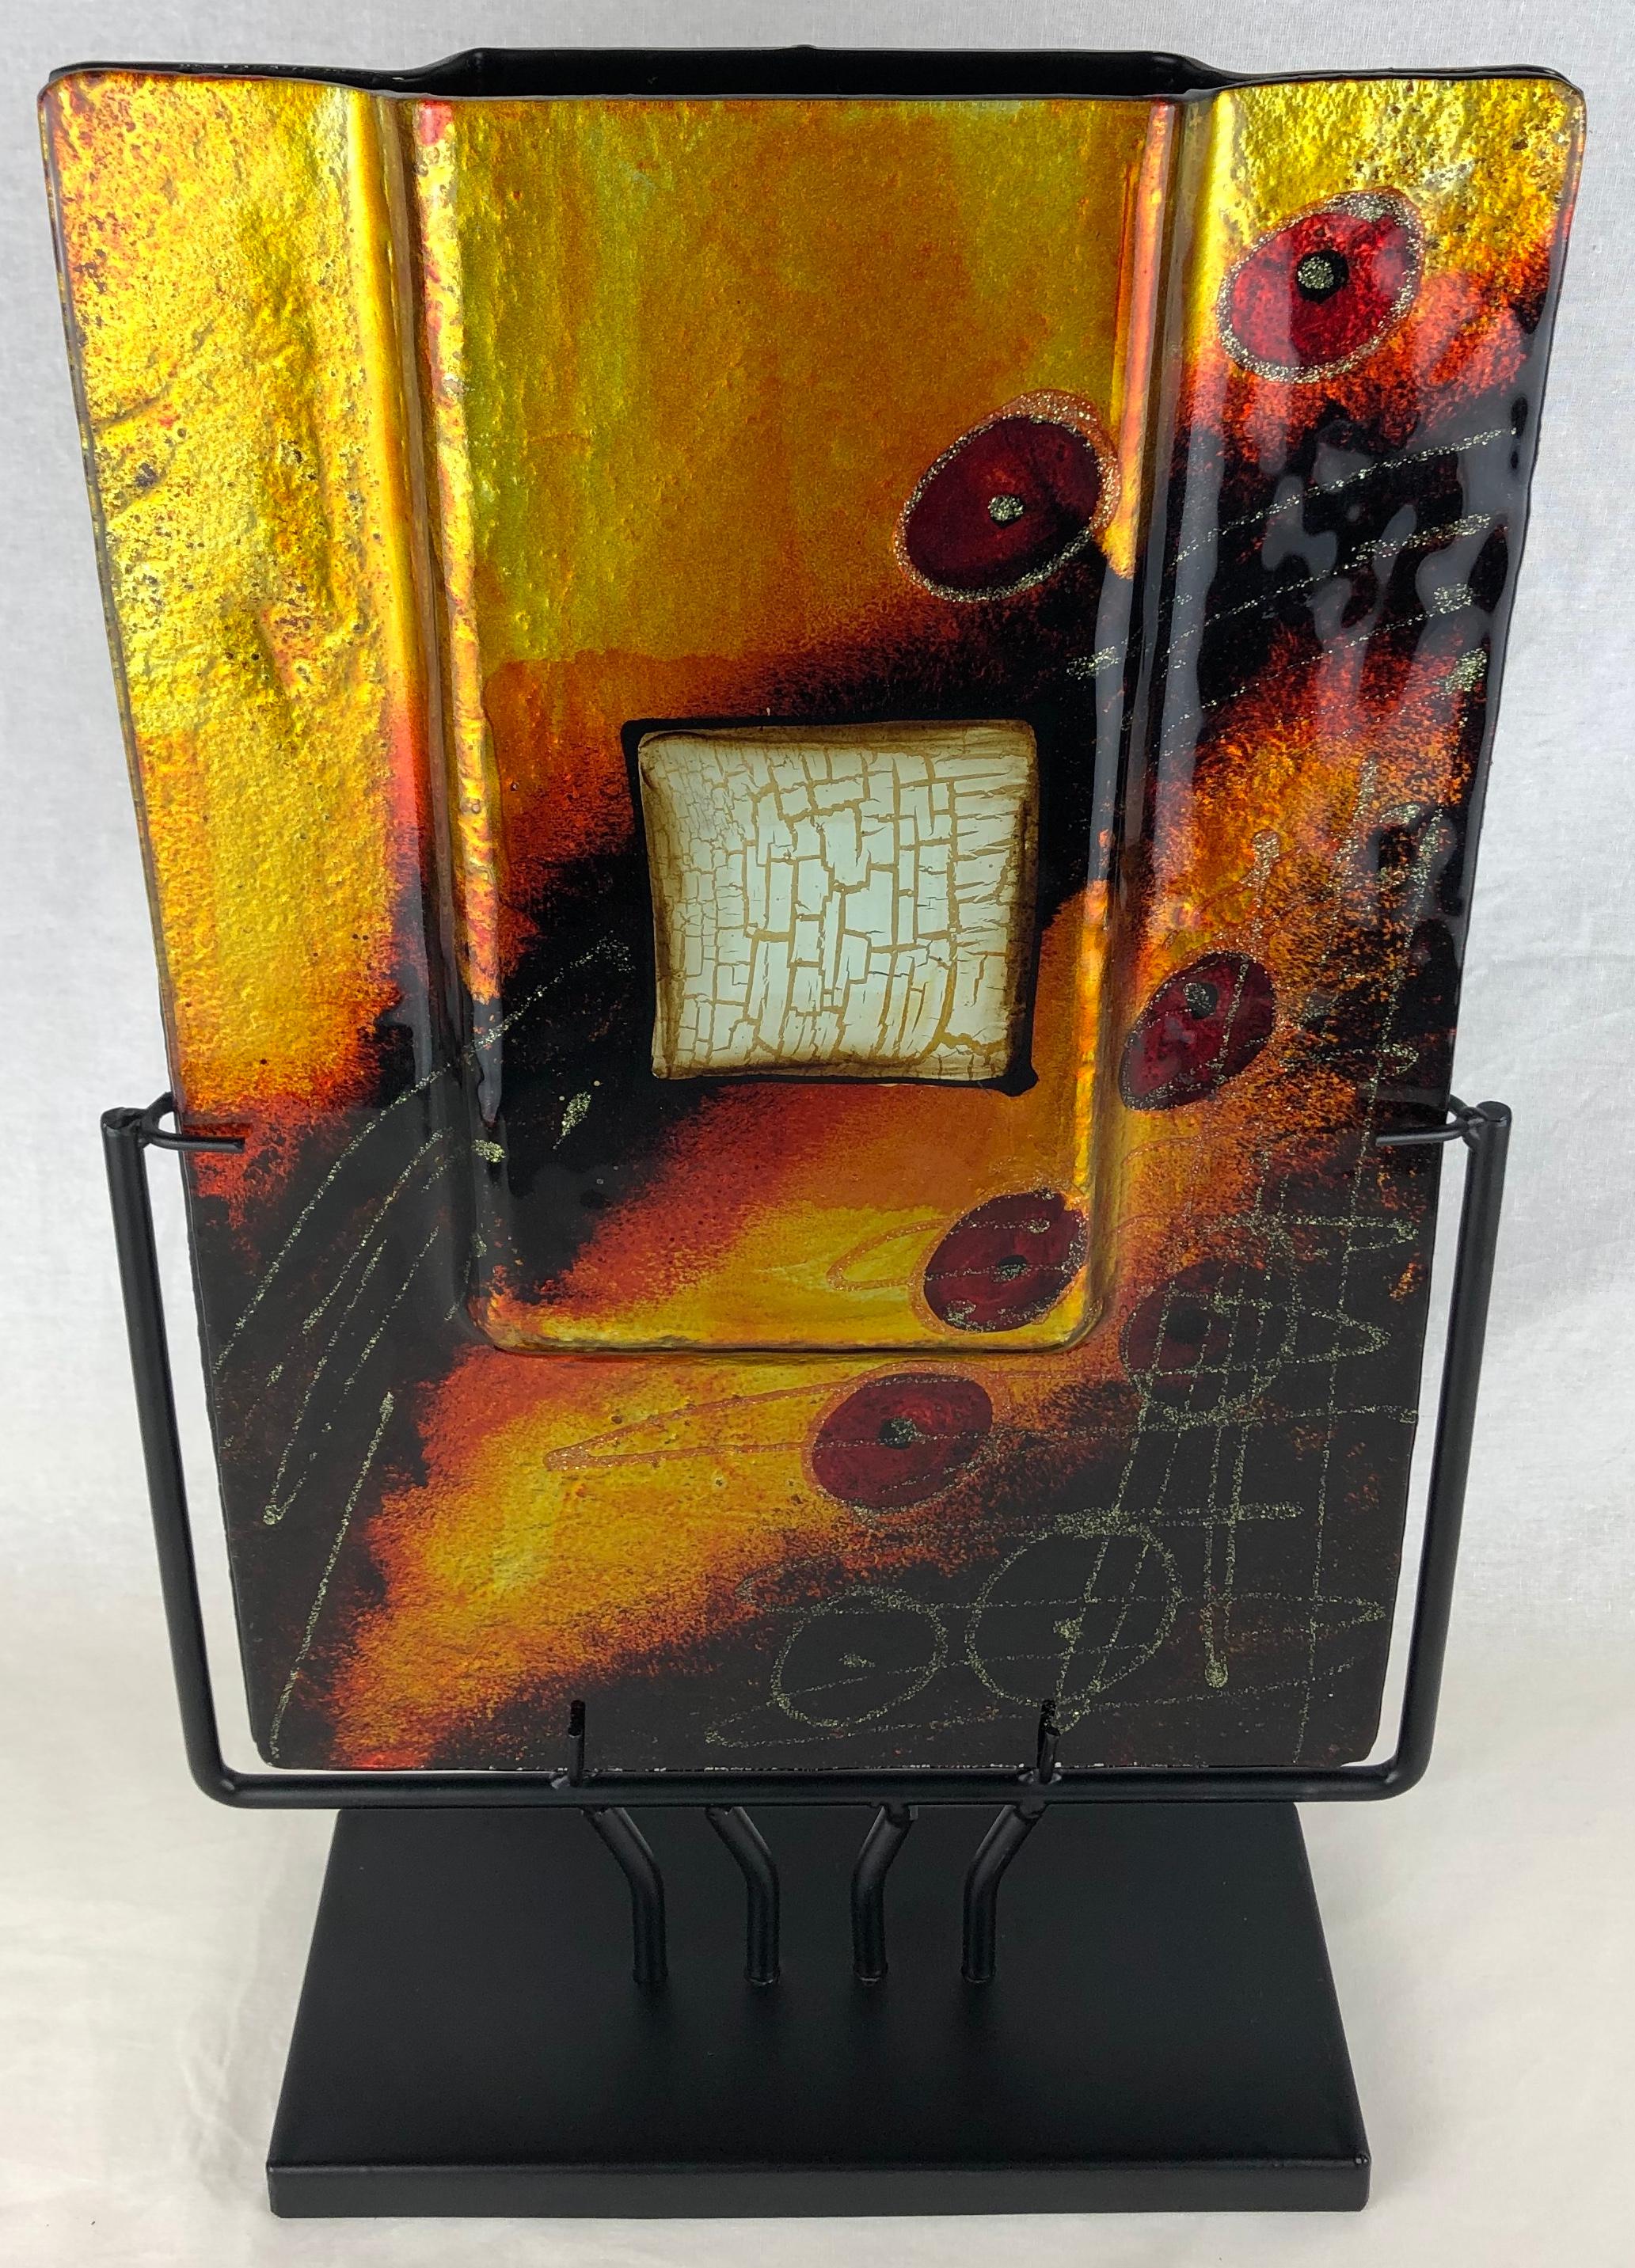 This beautiful decorative object features torched and crimped resin, welded and shaped metal which then received various patinated finishes. In this work the artist include a transparent resin in the center which creates a warm glow.

This